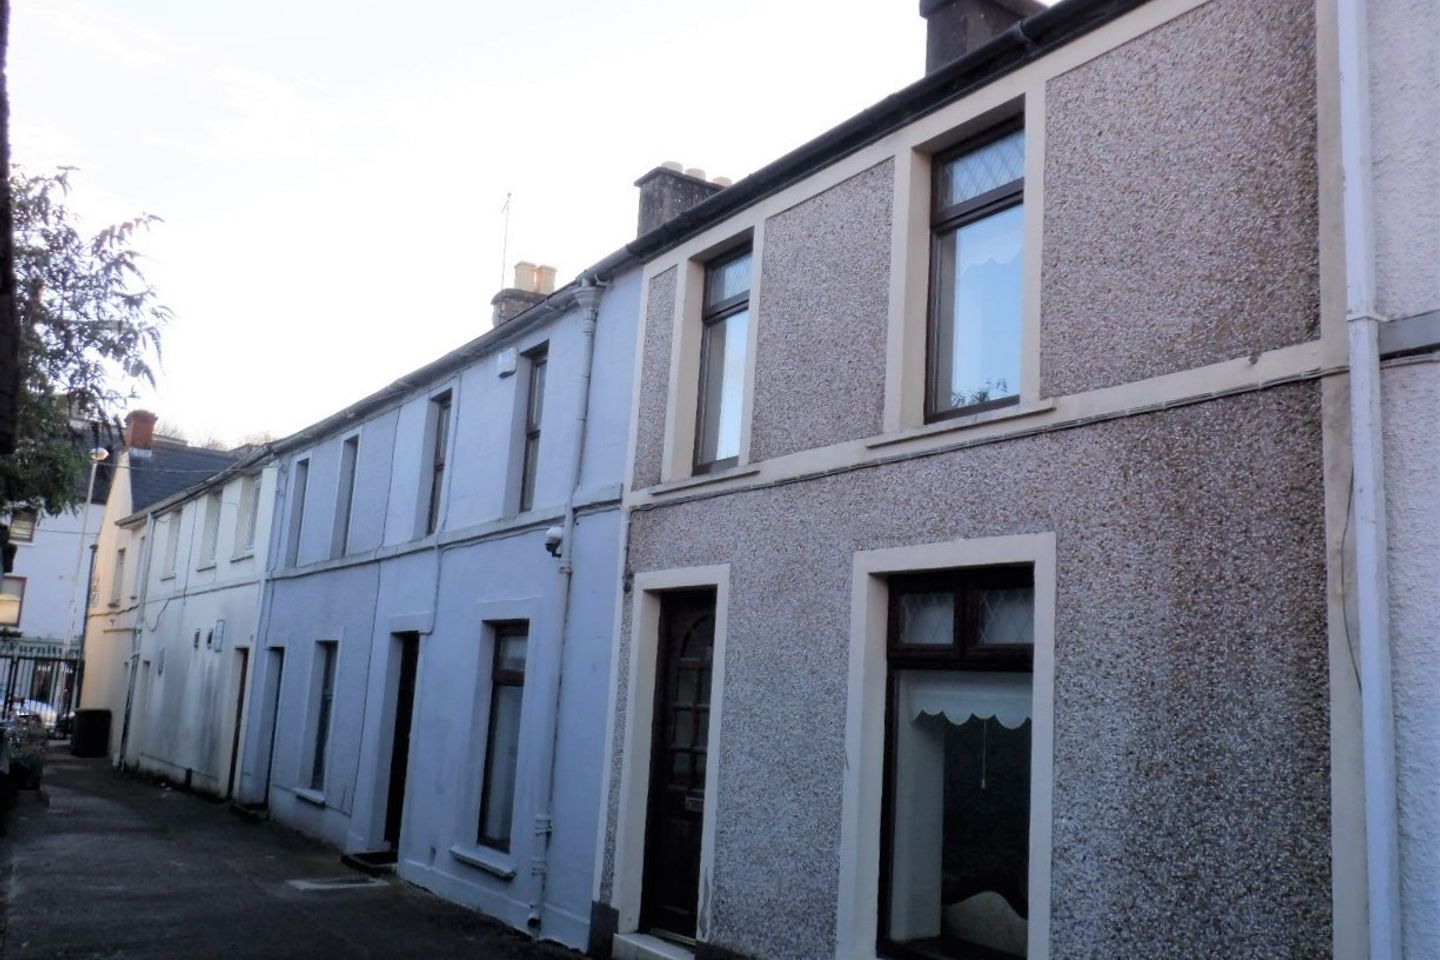 3 O'Connell Place, Watercourse Road, Cork City, Co. Cork, T23K22Y